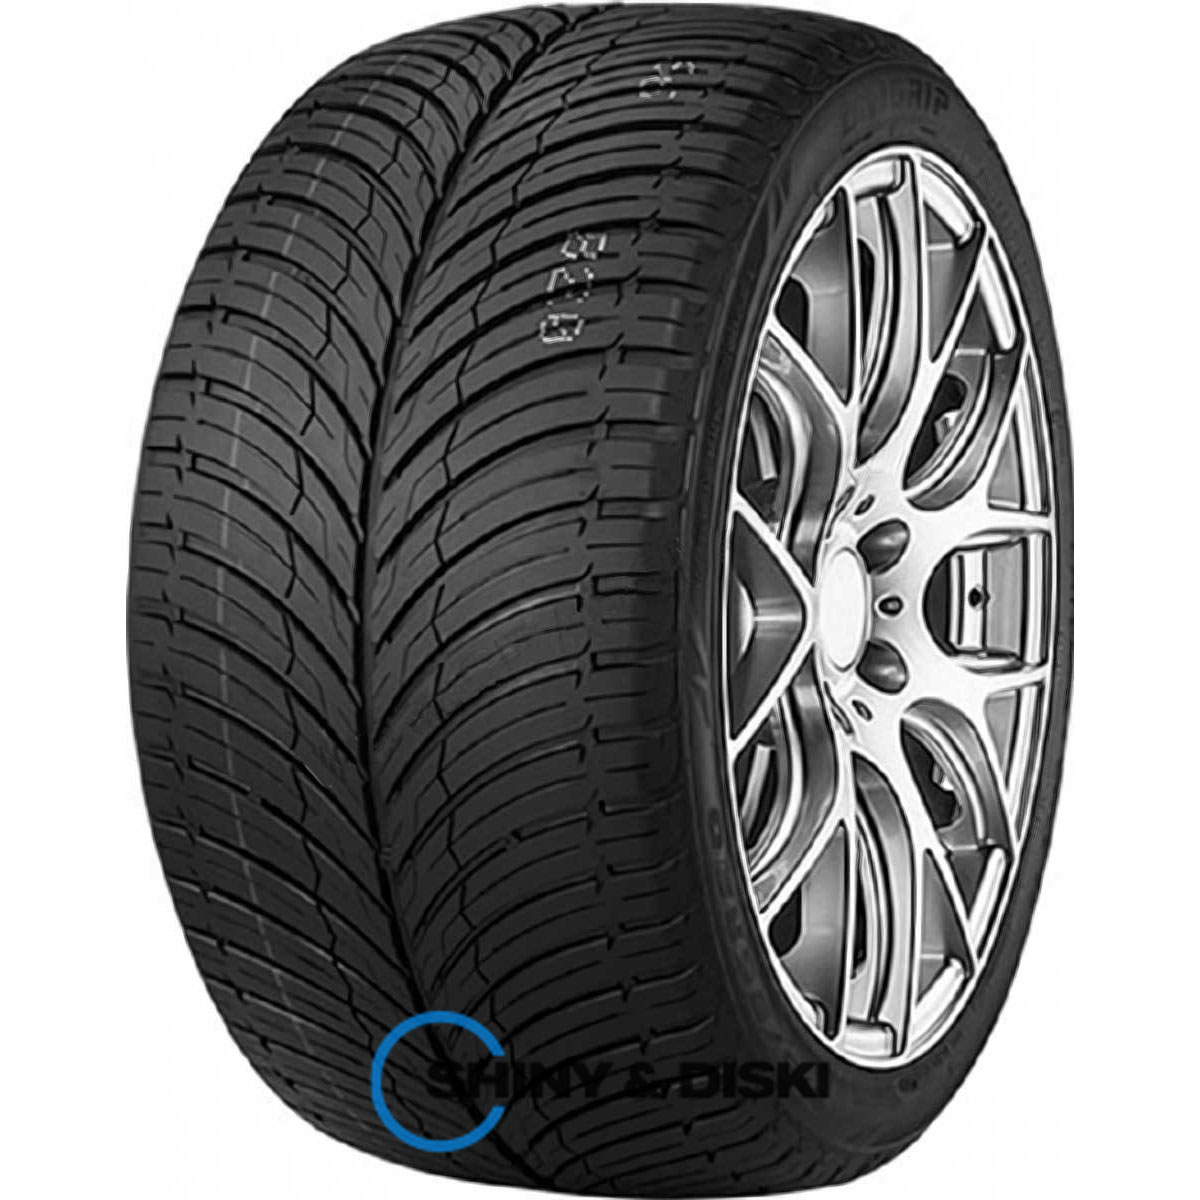 unigrip lateral force 4s 265/35 r22 102w